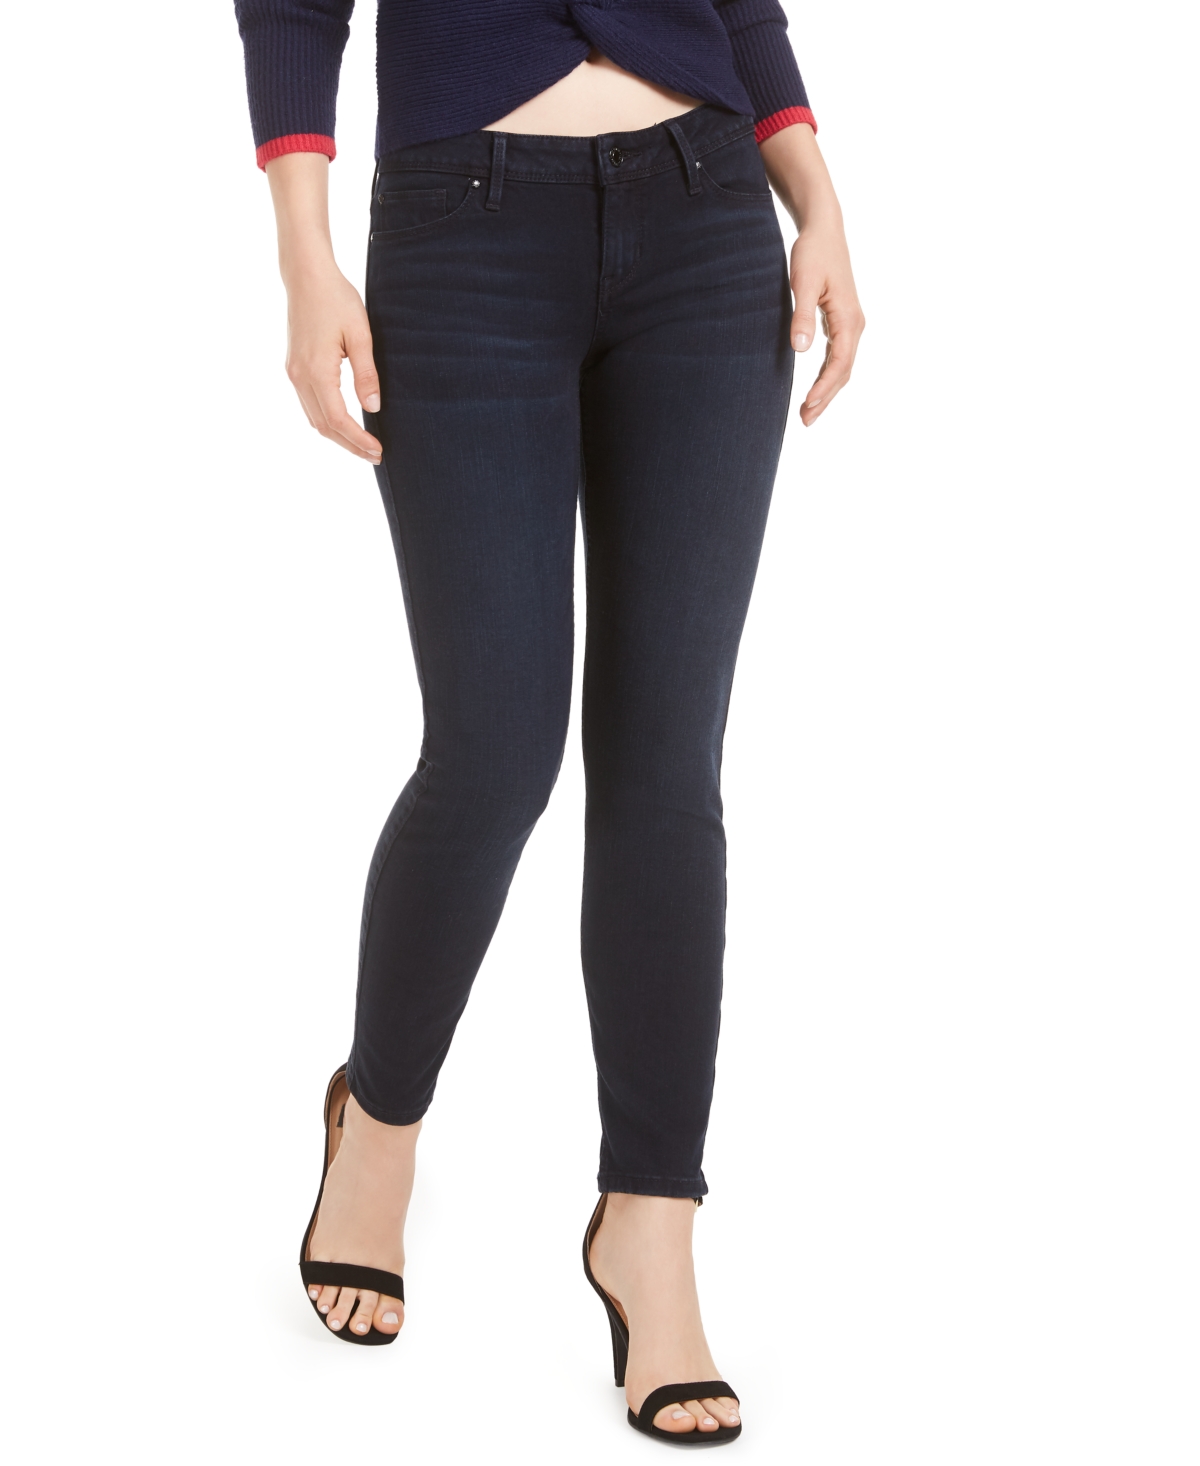  Guess Power Skinny Jeans